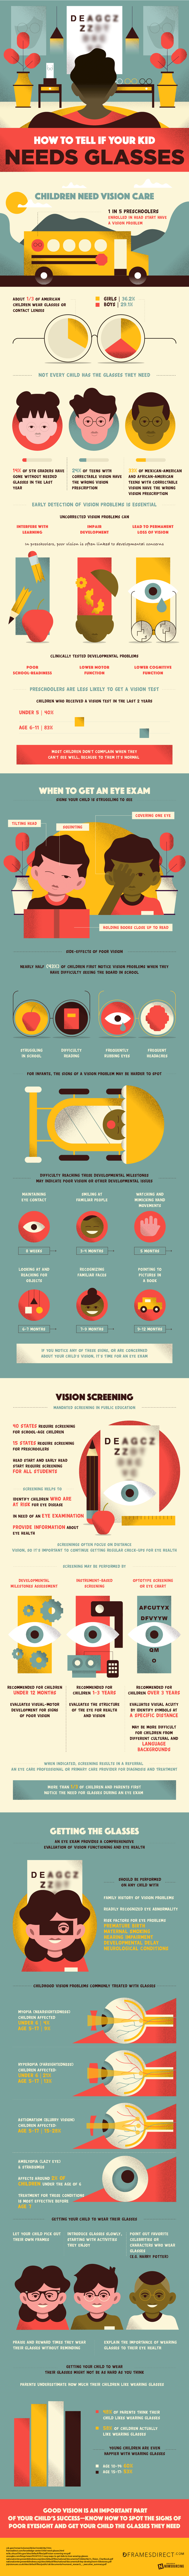 How to Tell if Your Kid Needs Glasses Infographic